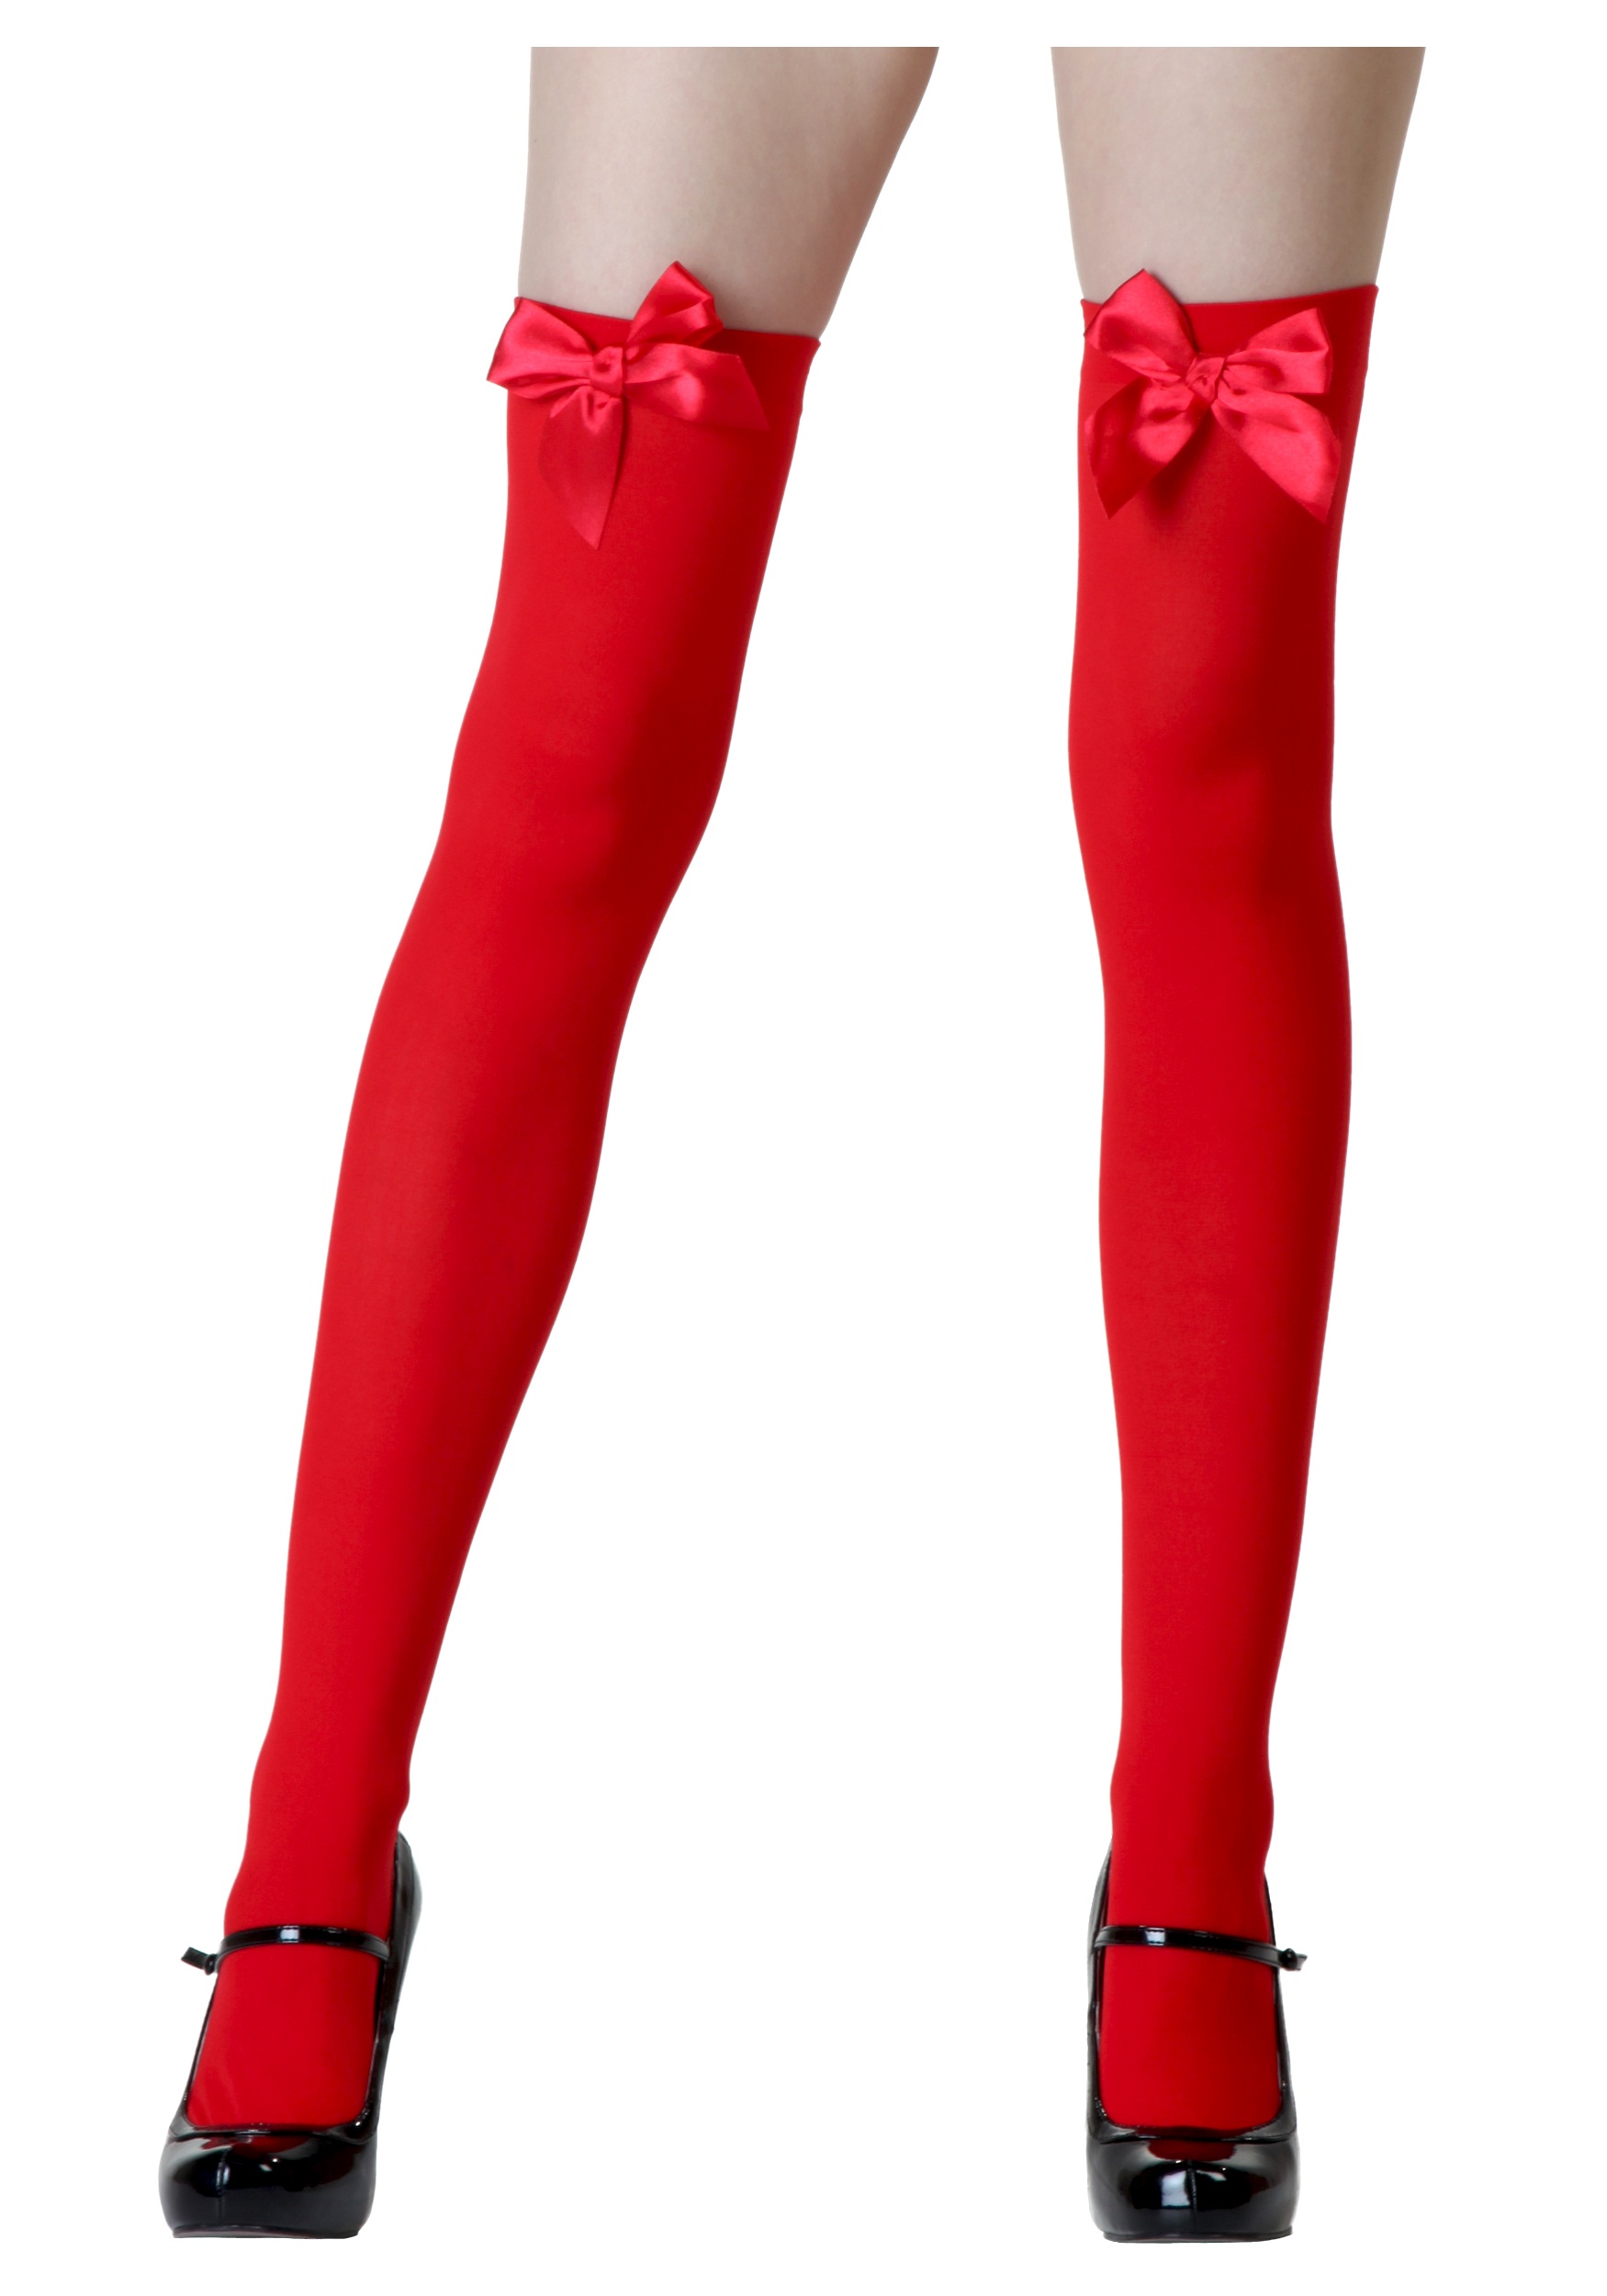 https://images.halloweencostumes.ca/products/13701/1-1/red-stockings-with-red-bows.jpg